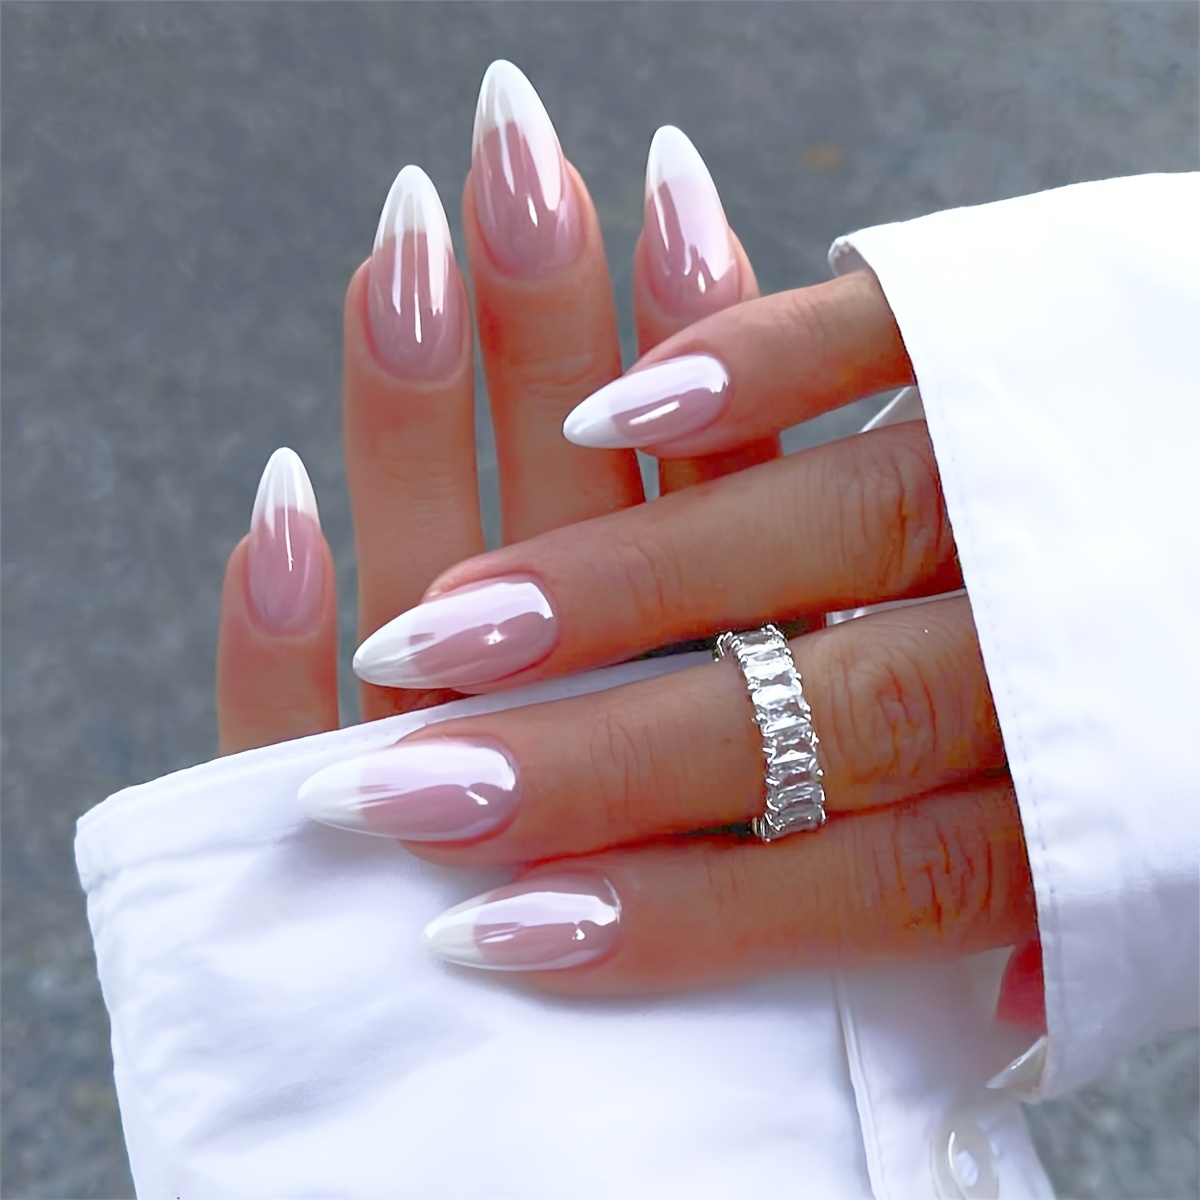 

24pcs/set White French Tip Press On Nails Medium Almond Aurora Fake Nails Simple Style Acrylic False Nails Glue On Nails For Women And Girls